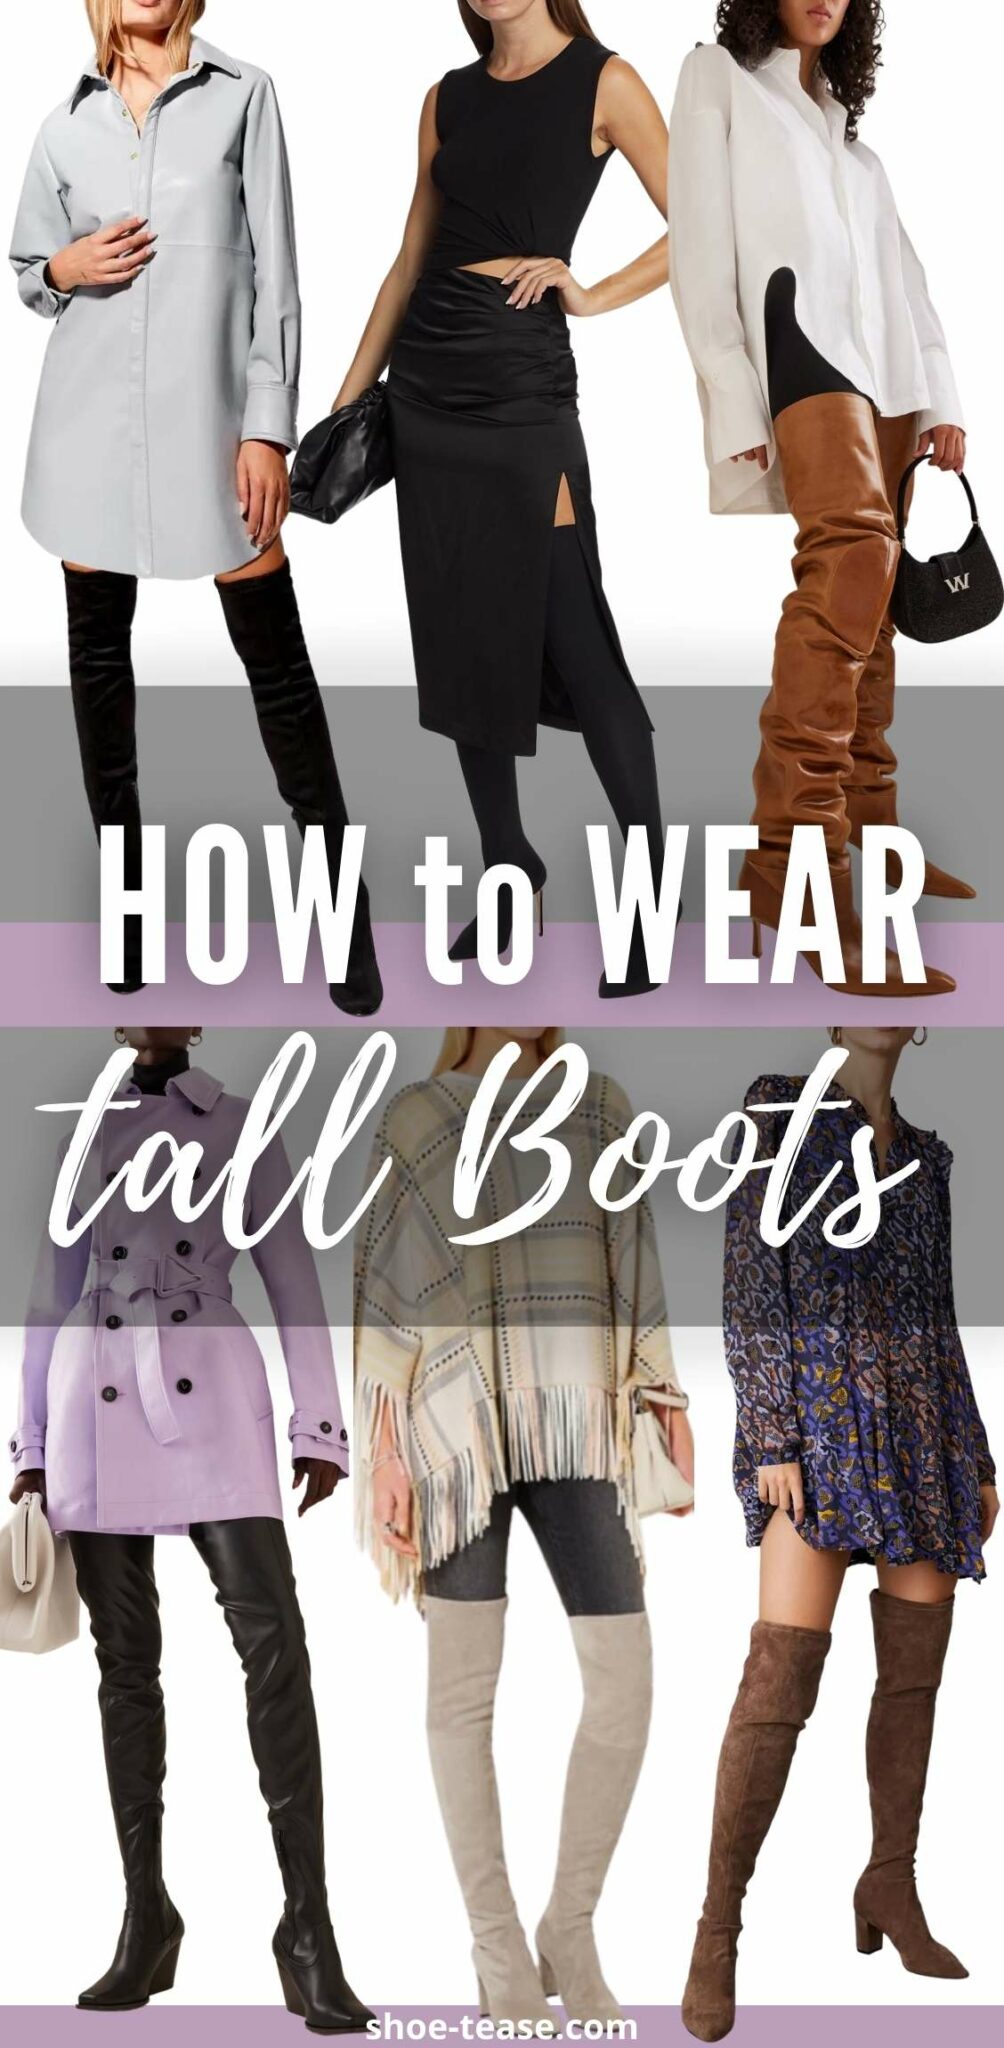 How to Wear Thigh High Boots Outfits - Over 35 Styling Ideas!